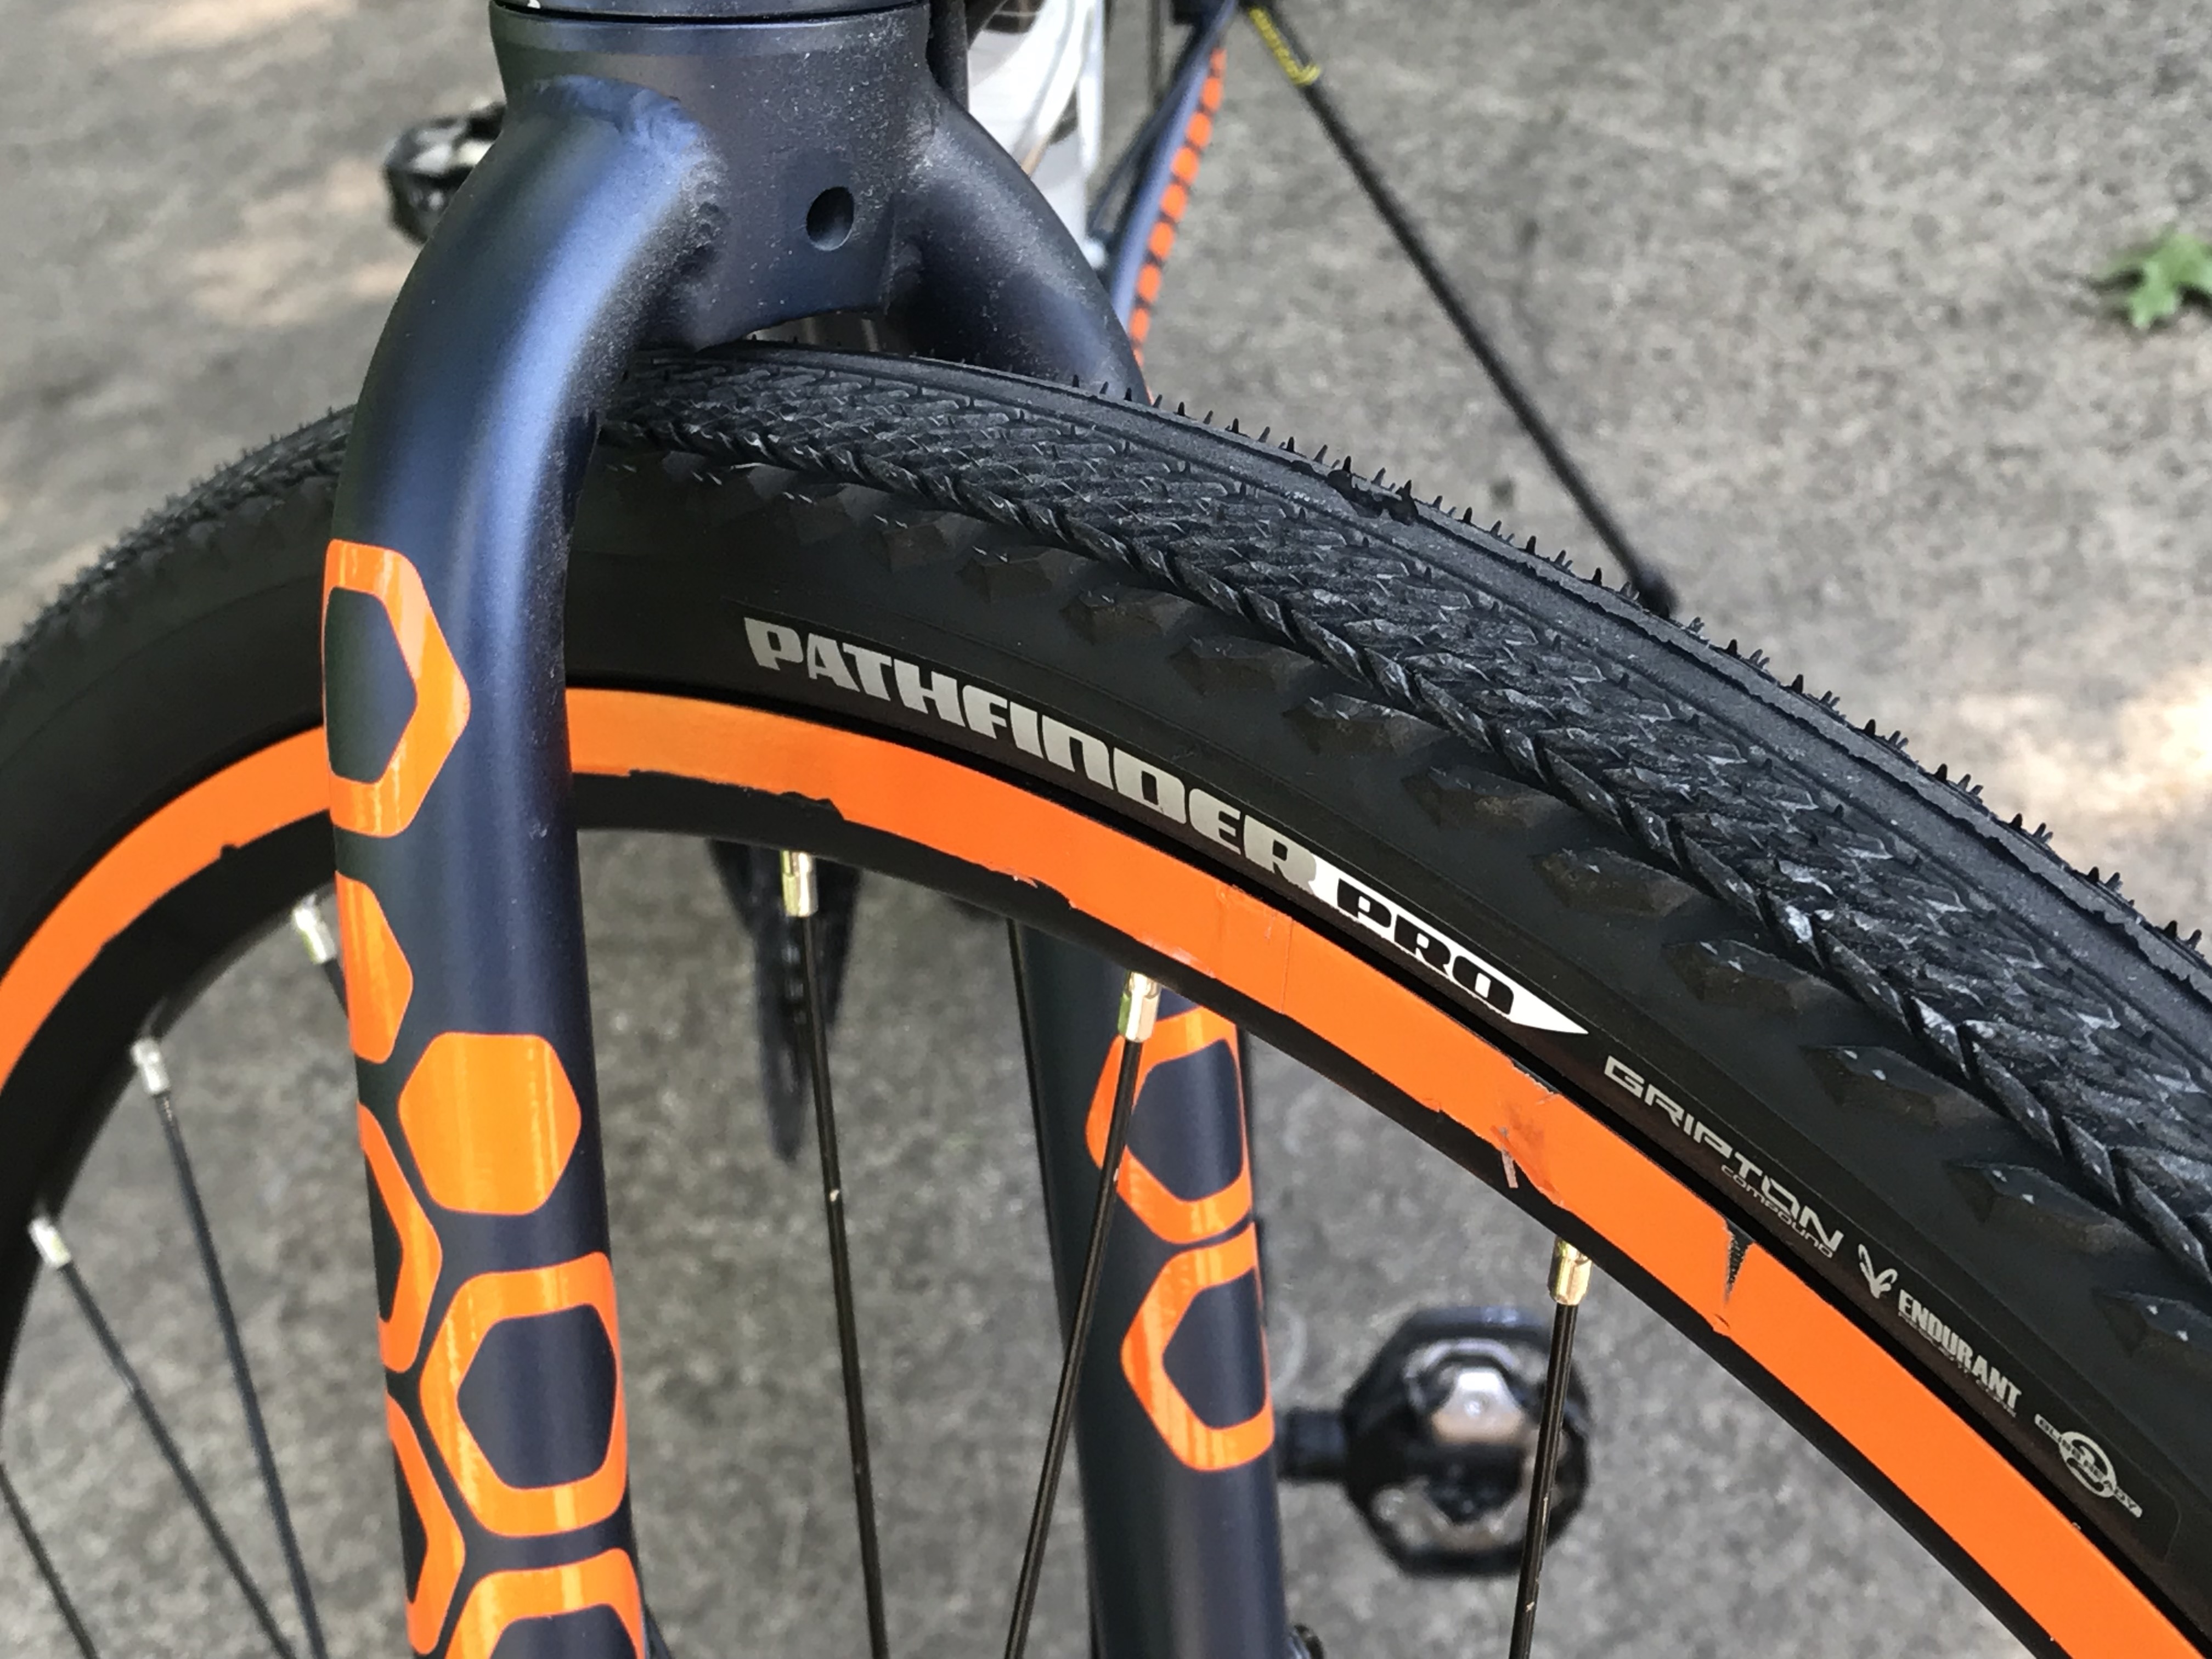 specialized gravel tires